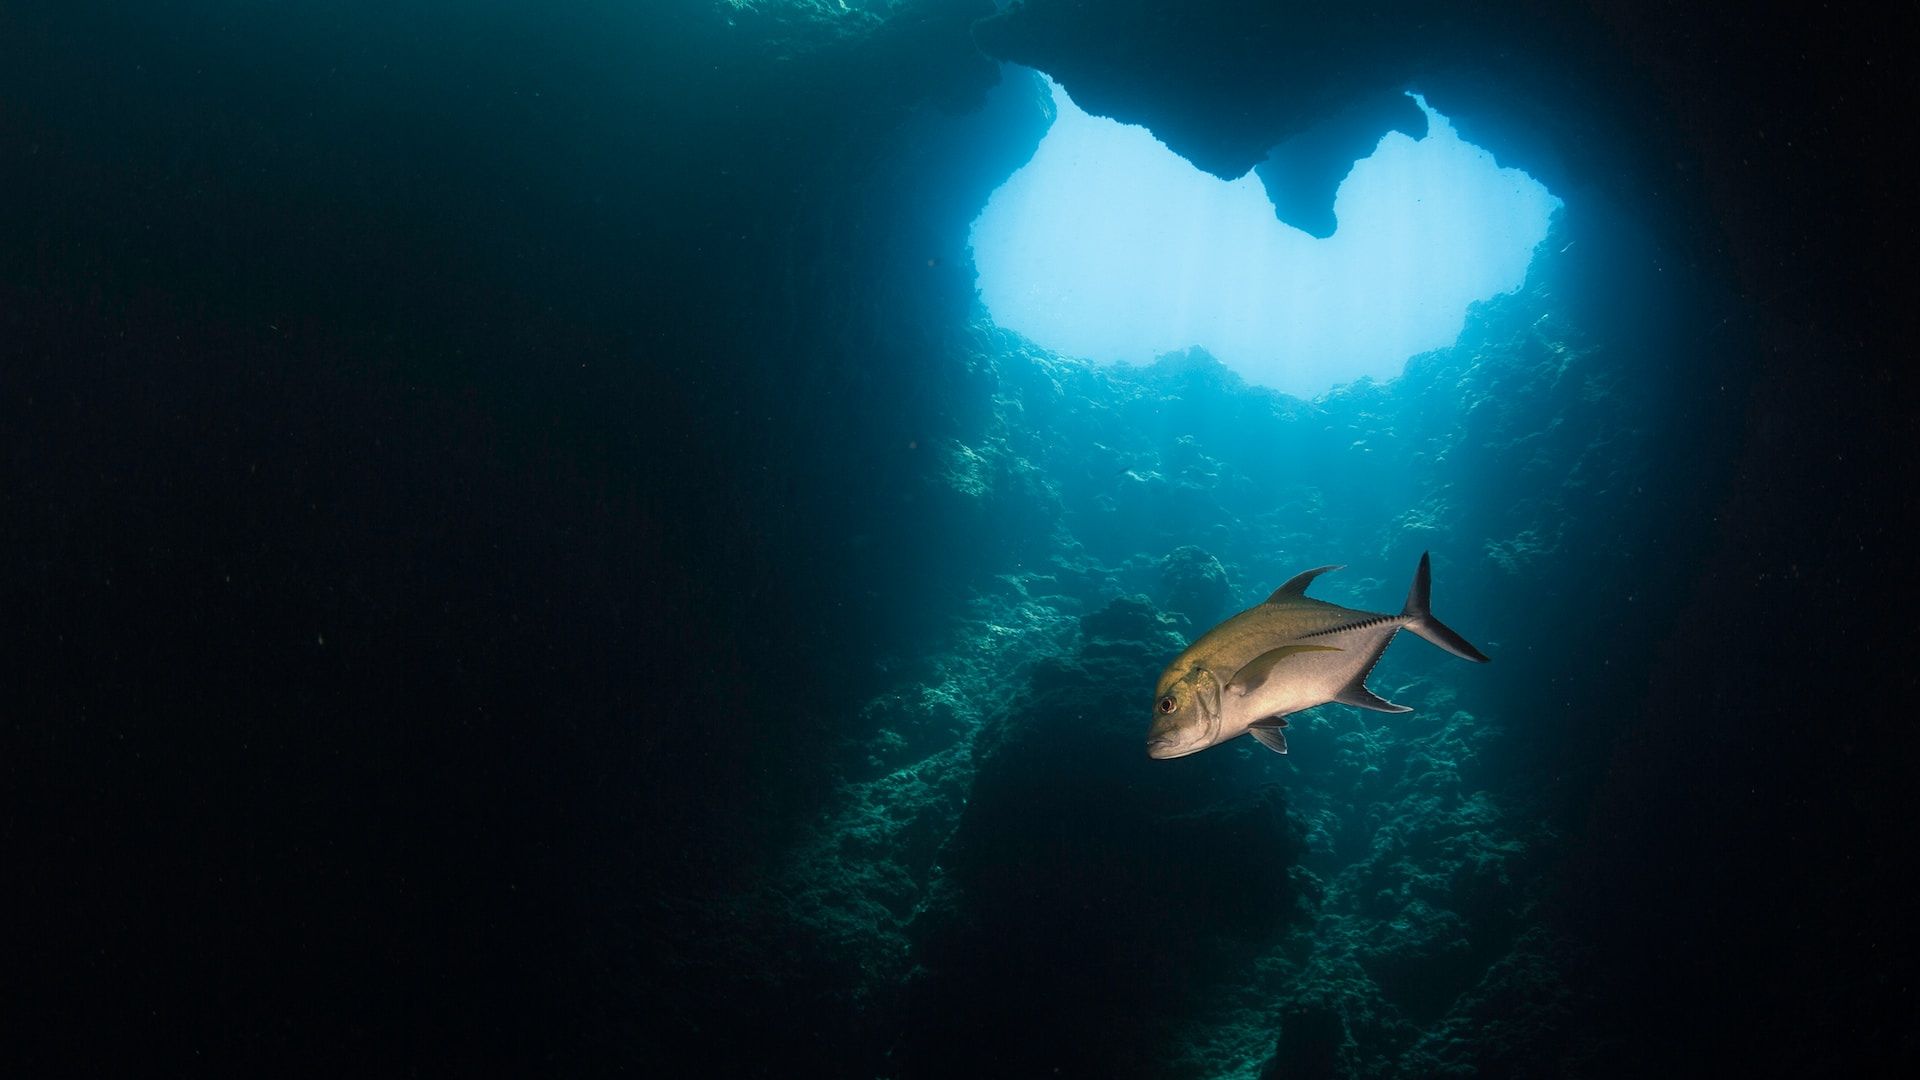 Fish in an underwater cave